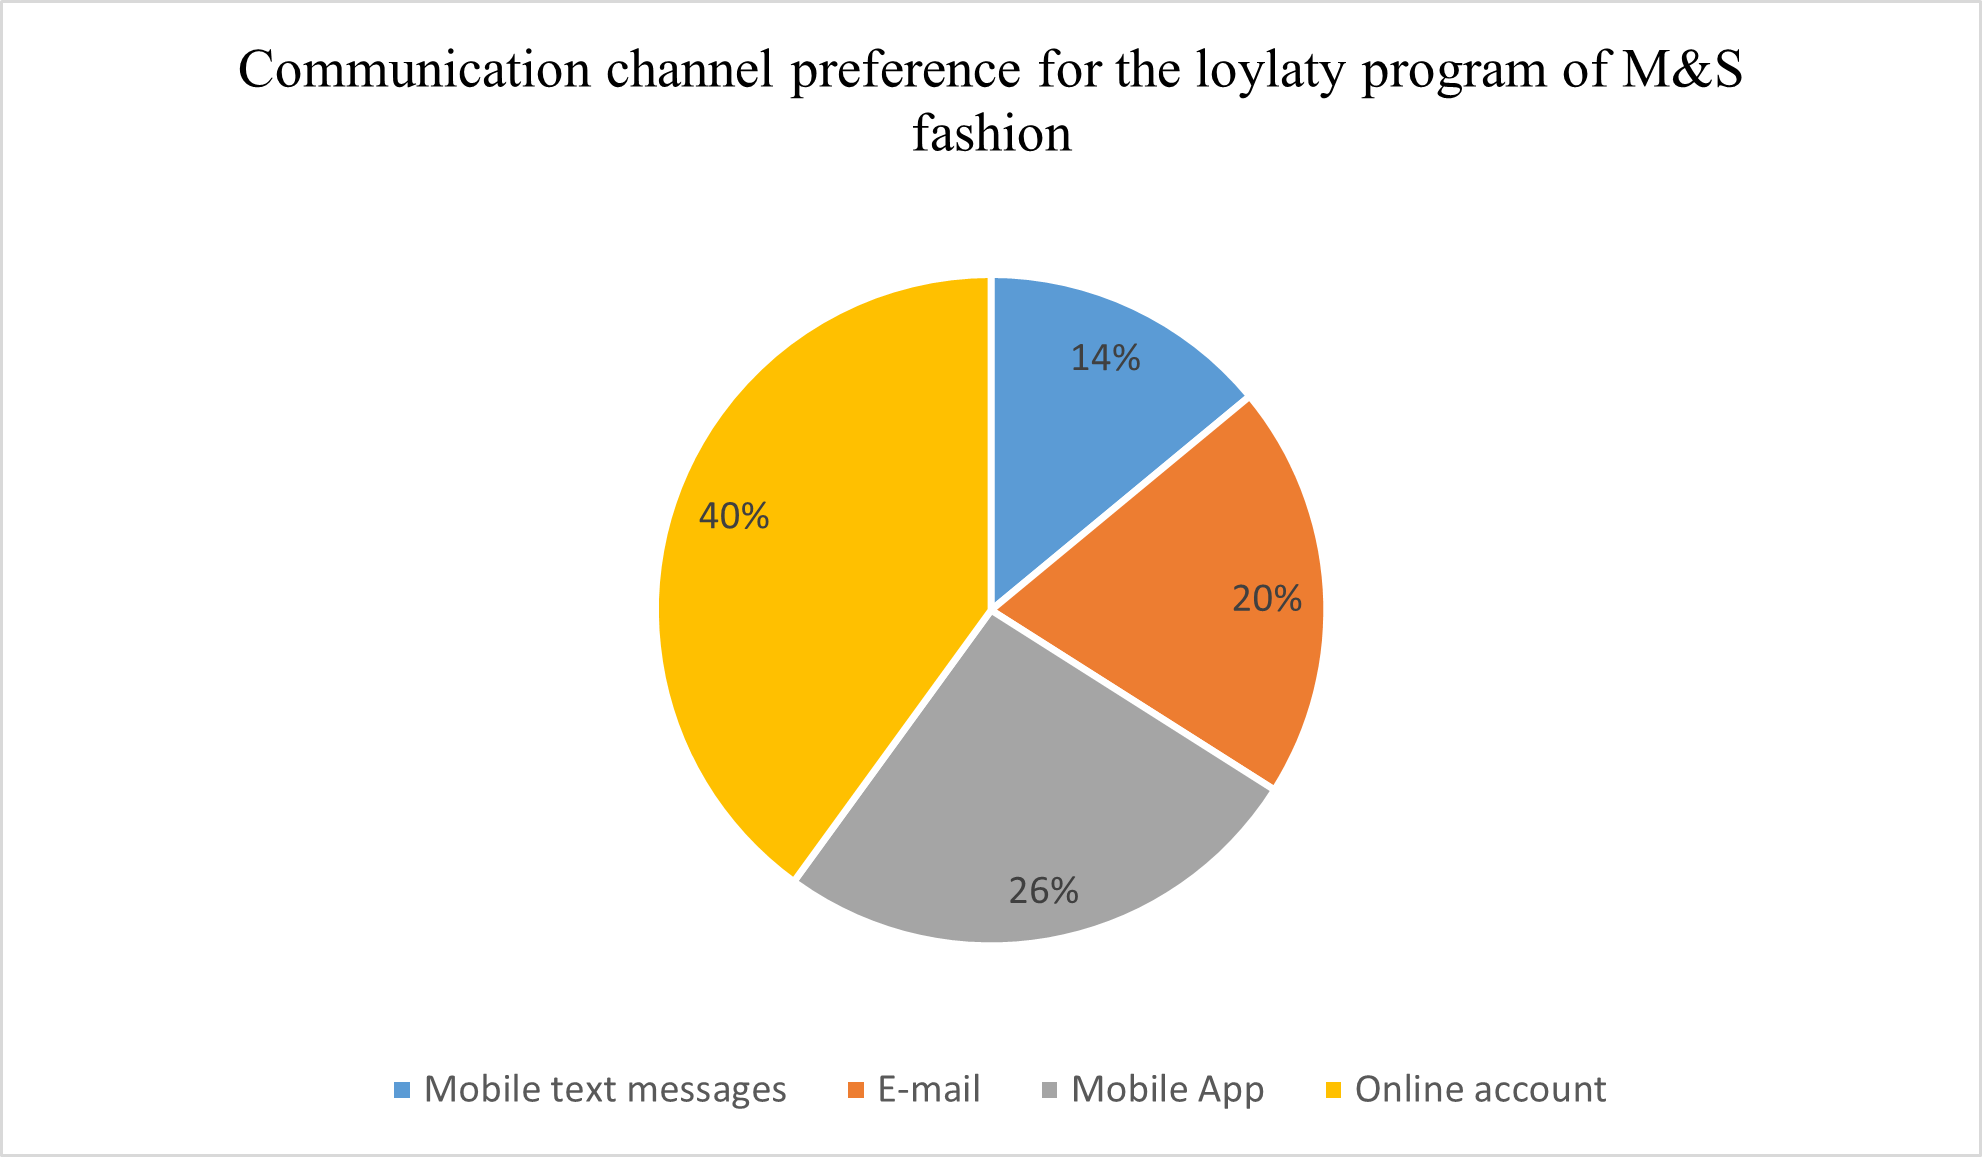 Communication channel preference for the loyalty program of M&S fashion